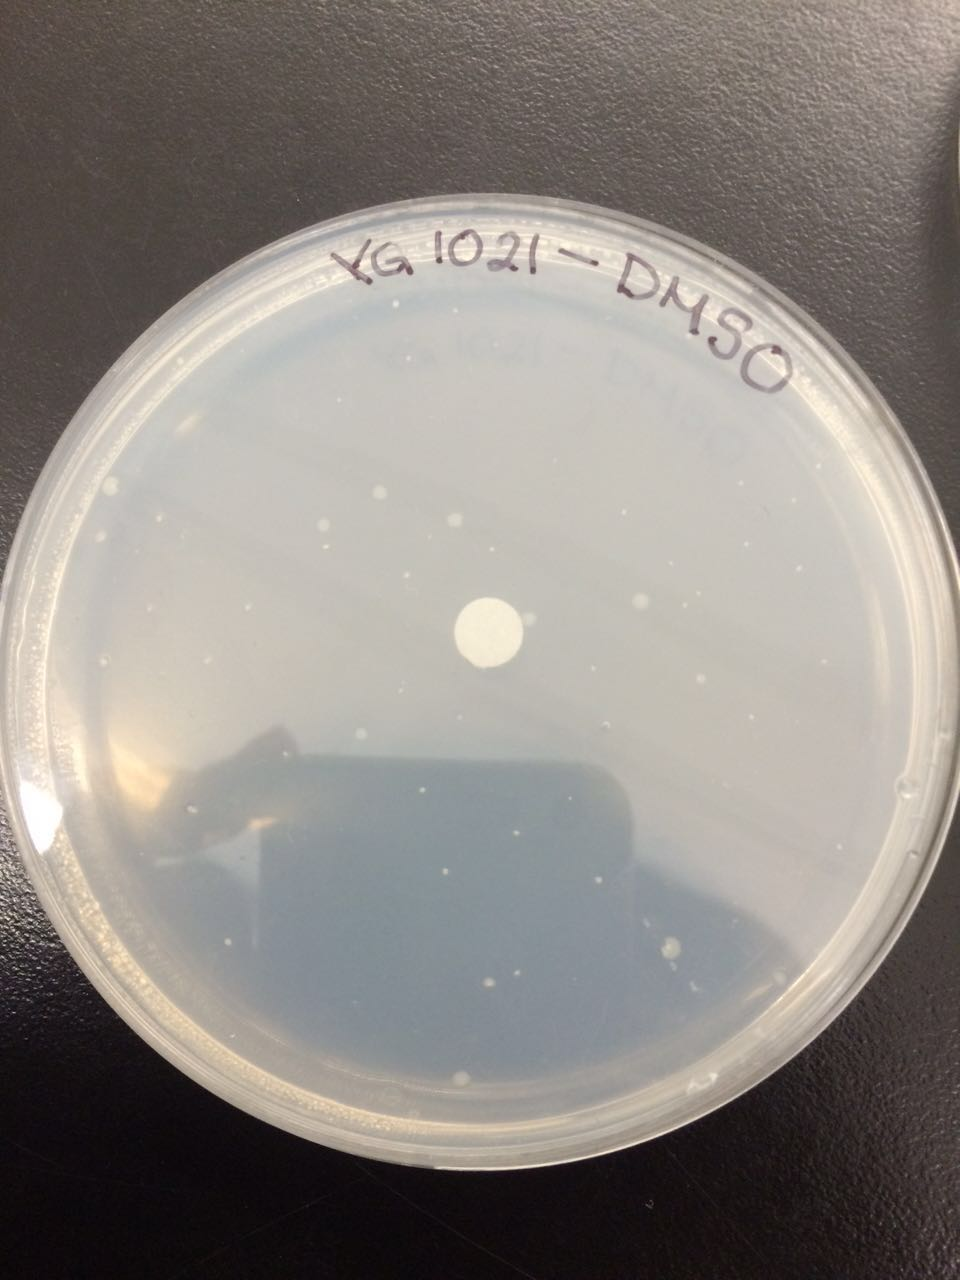 The plate with the Salmonella strain YG 1021 that is required to monitor how many spontaneous mutations can happen in a Salmonella strain without chemical compounds.